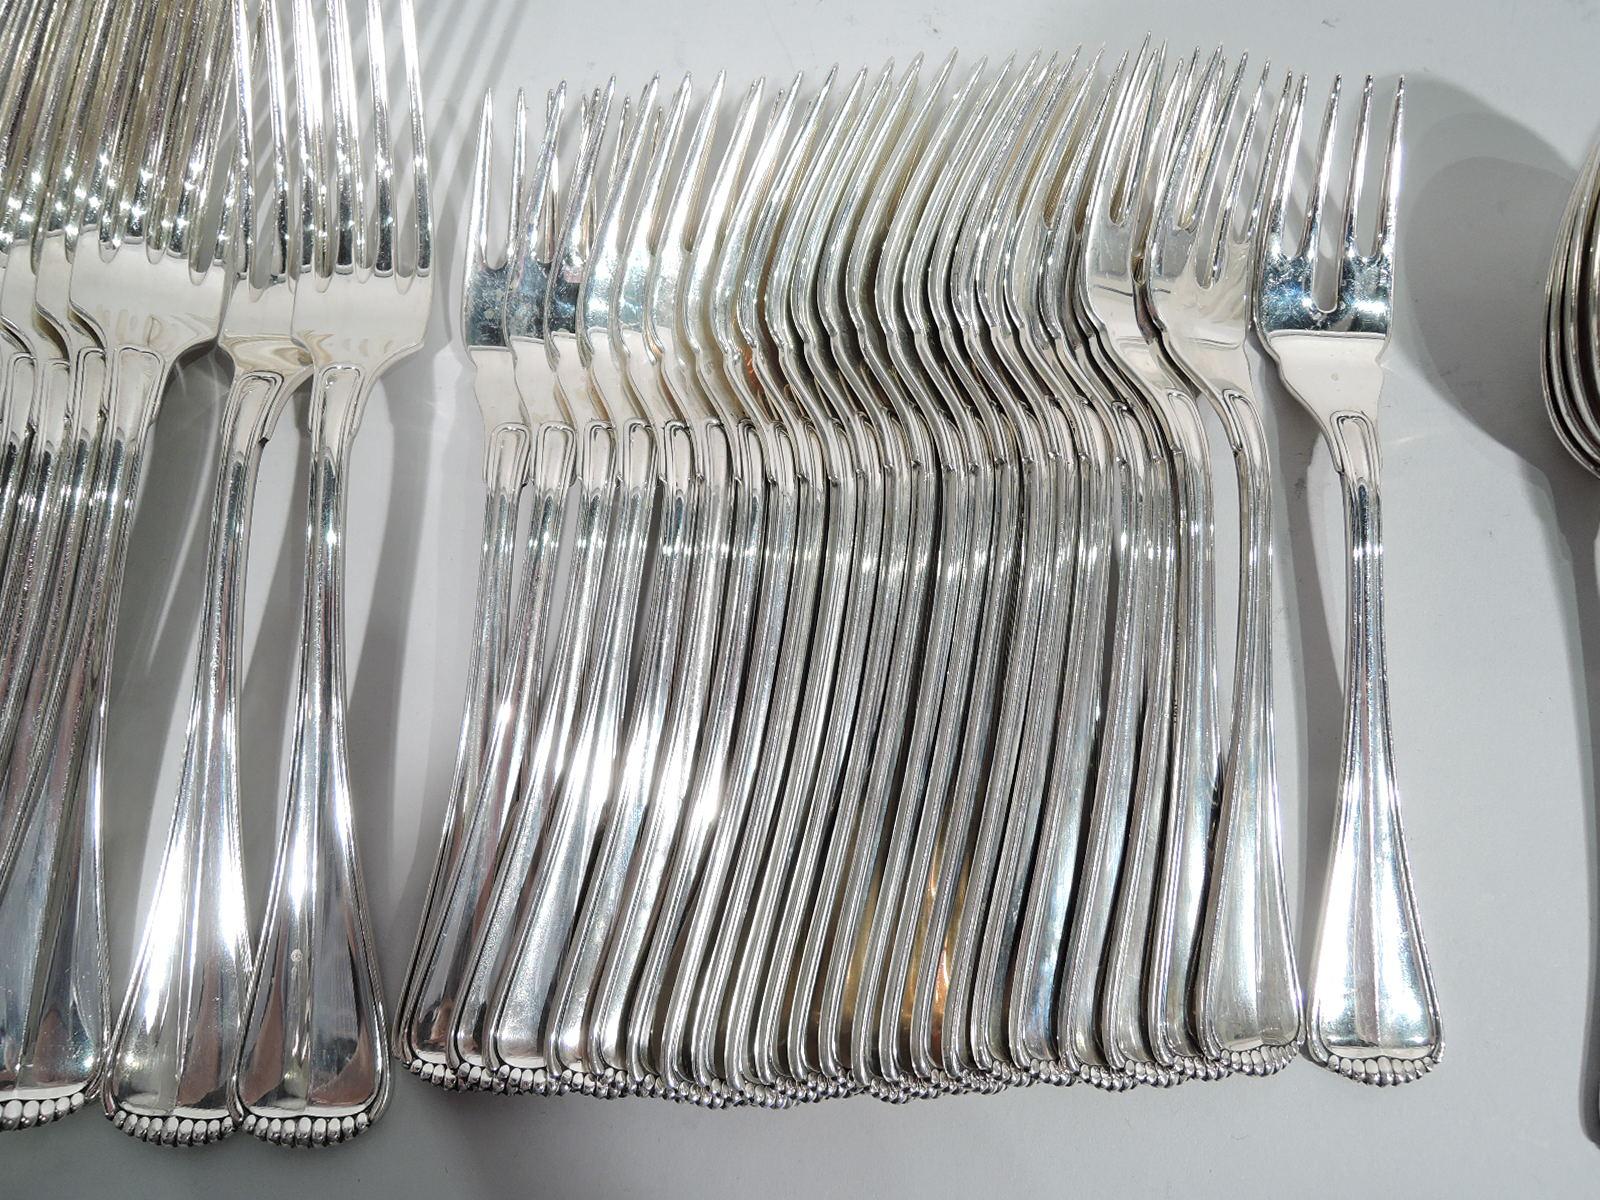 20th Century Buccellati Milano Sterling Silver Dinner Set for 24 with 120 Pieces